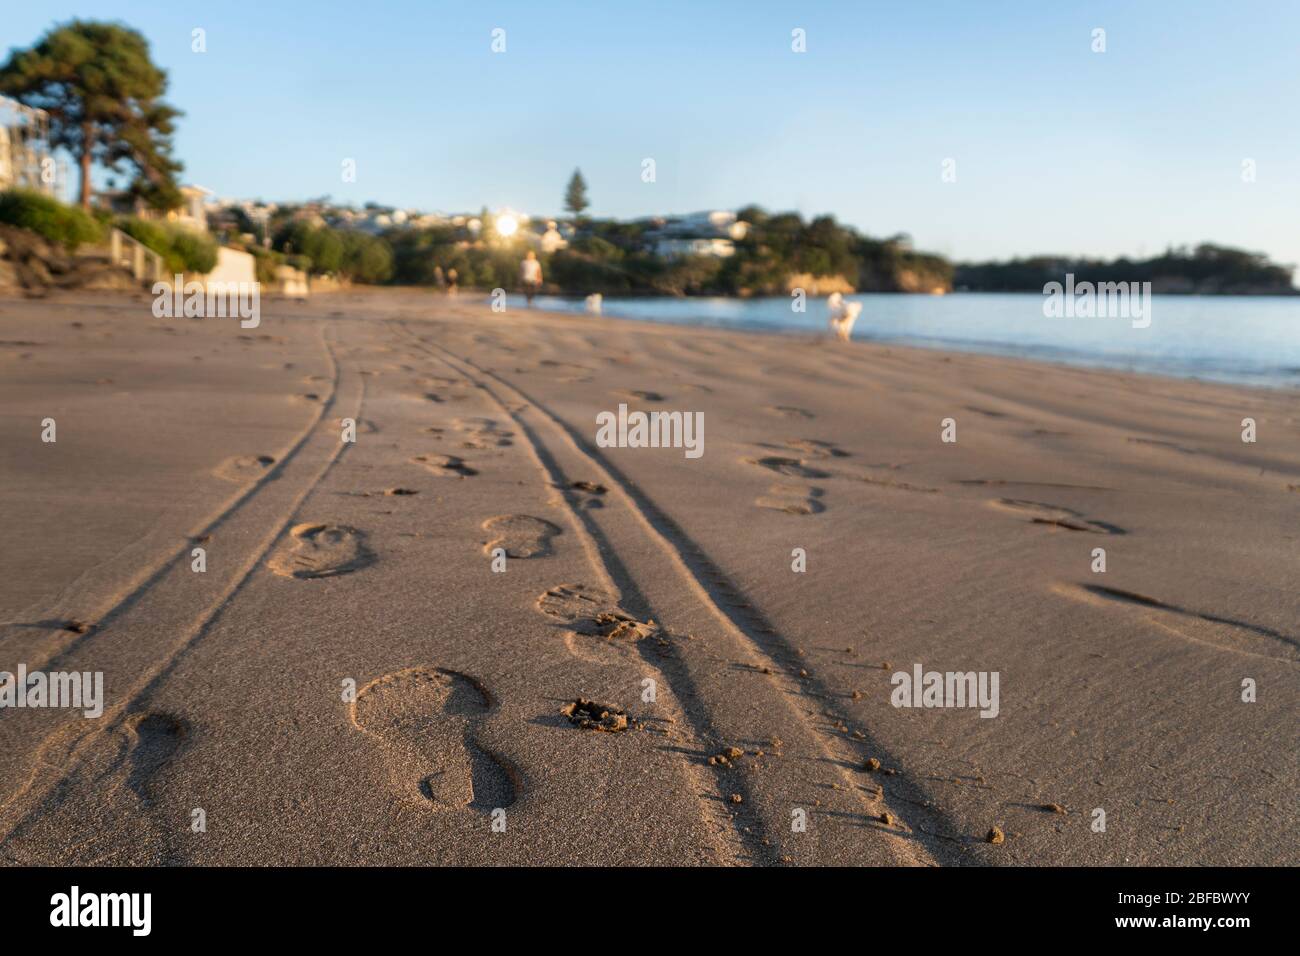 Footprints and wheel marks on the beach at sunrise Stock Photo